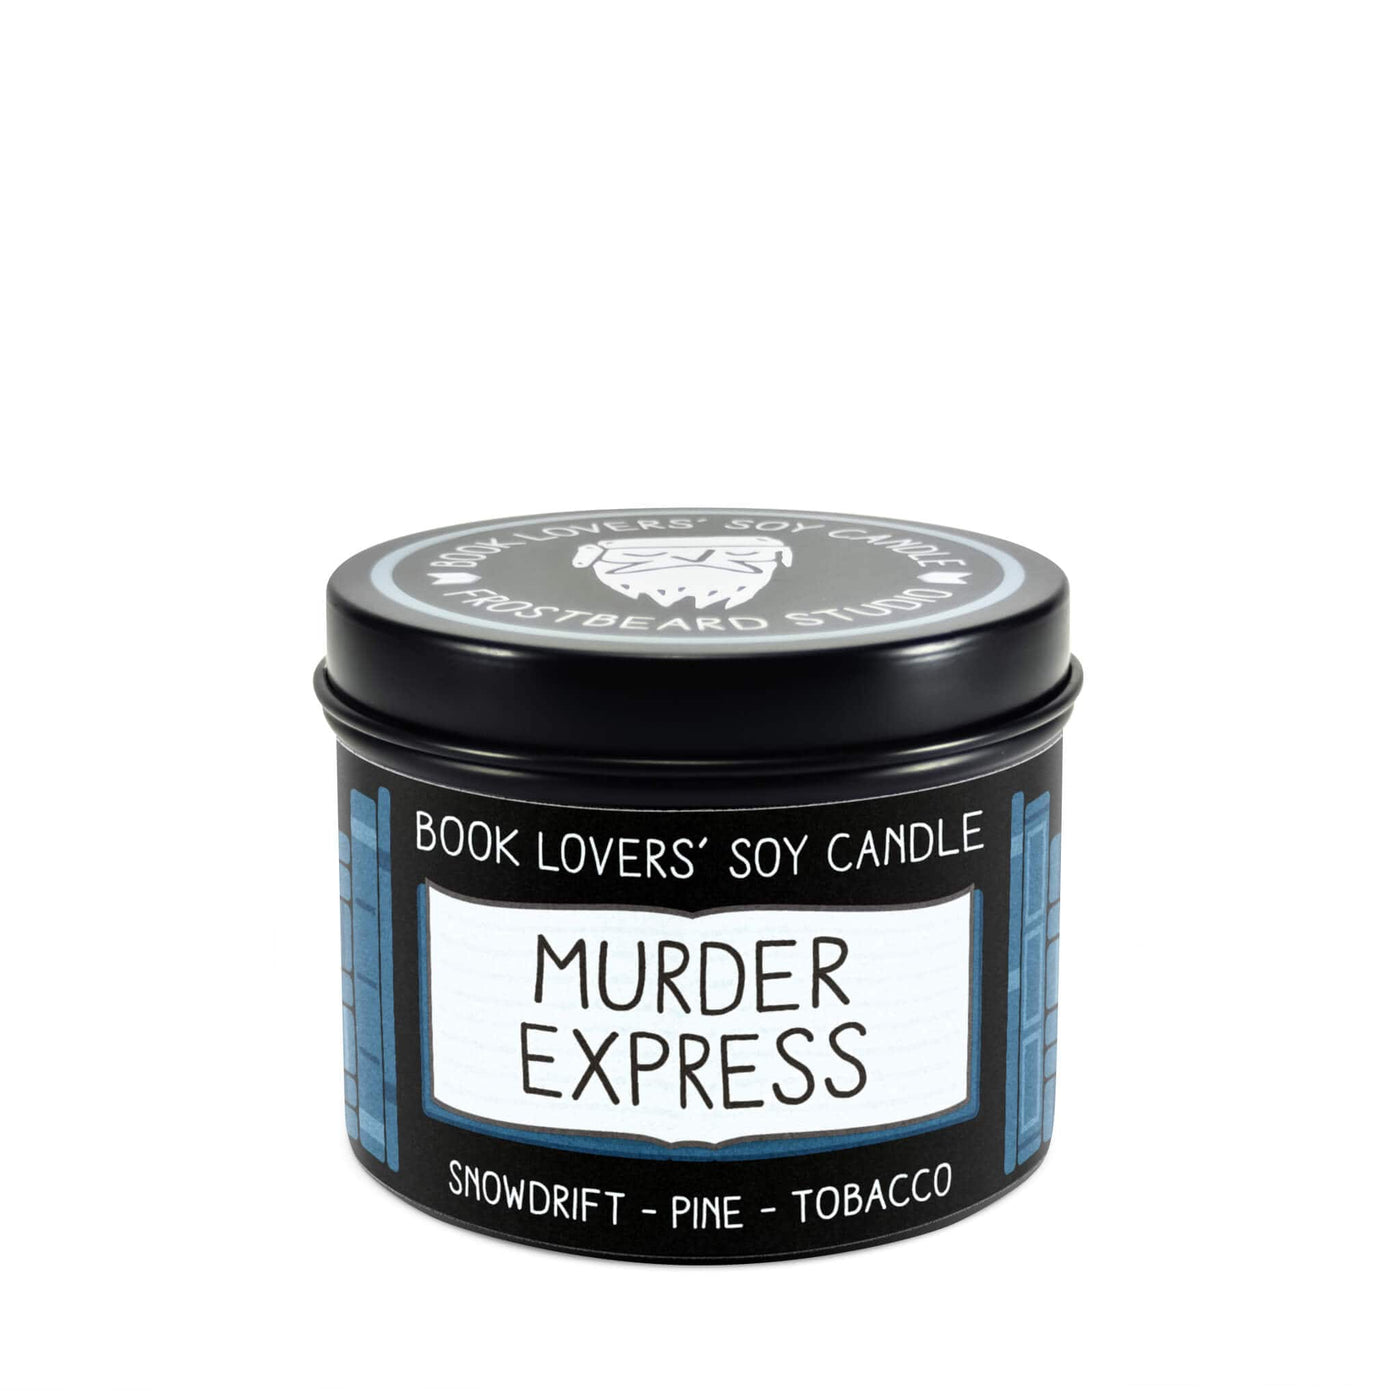 Murder Express - 4 oz Tin - Book Lovers' Soy Candle - Frostbeard Studio